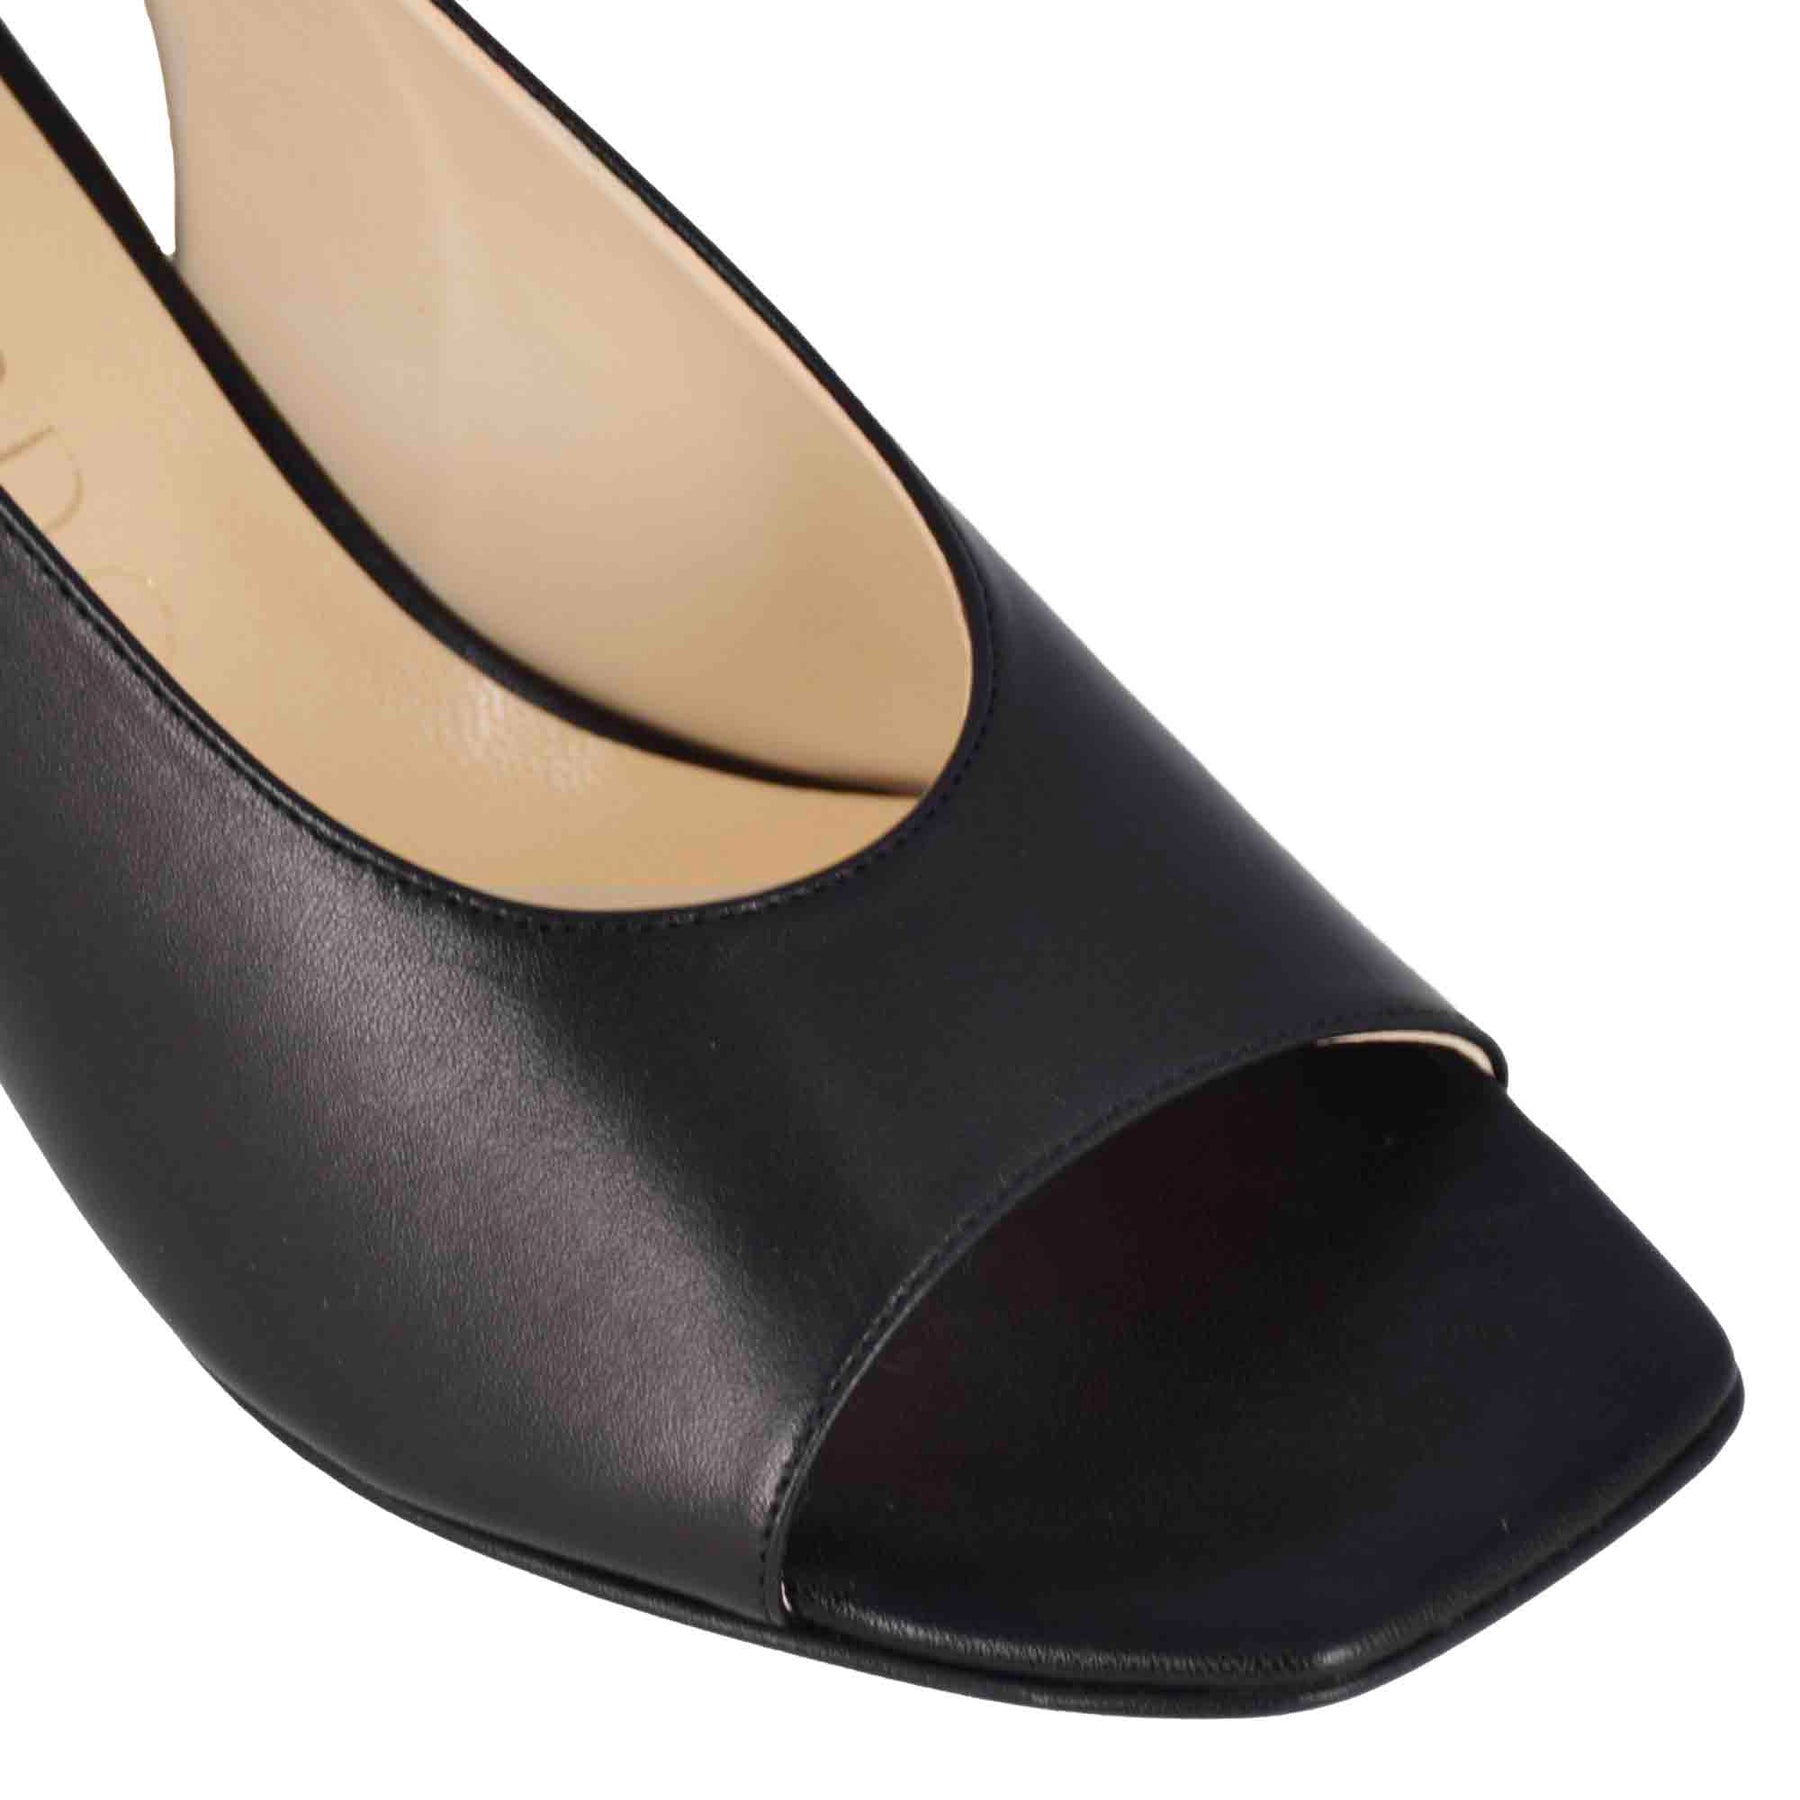 Women's slingback sandal in black leather with square toe